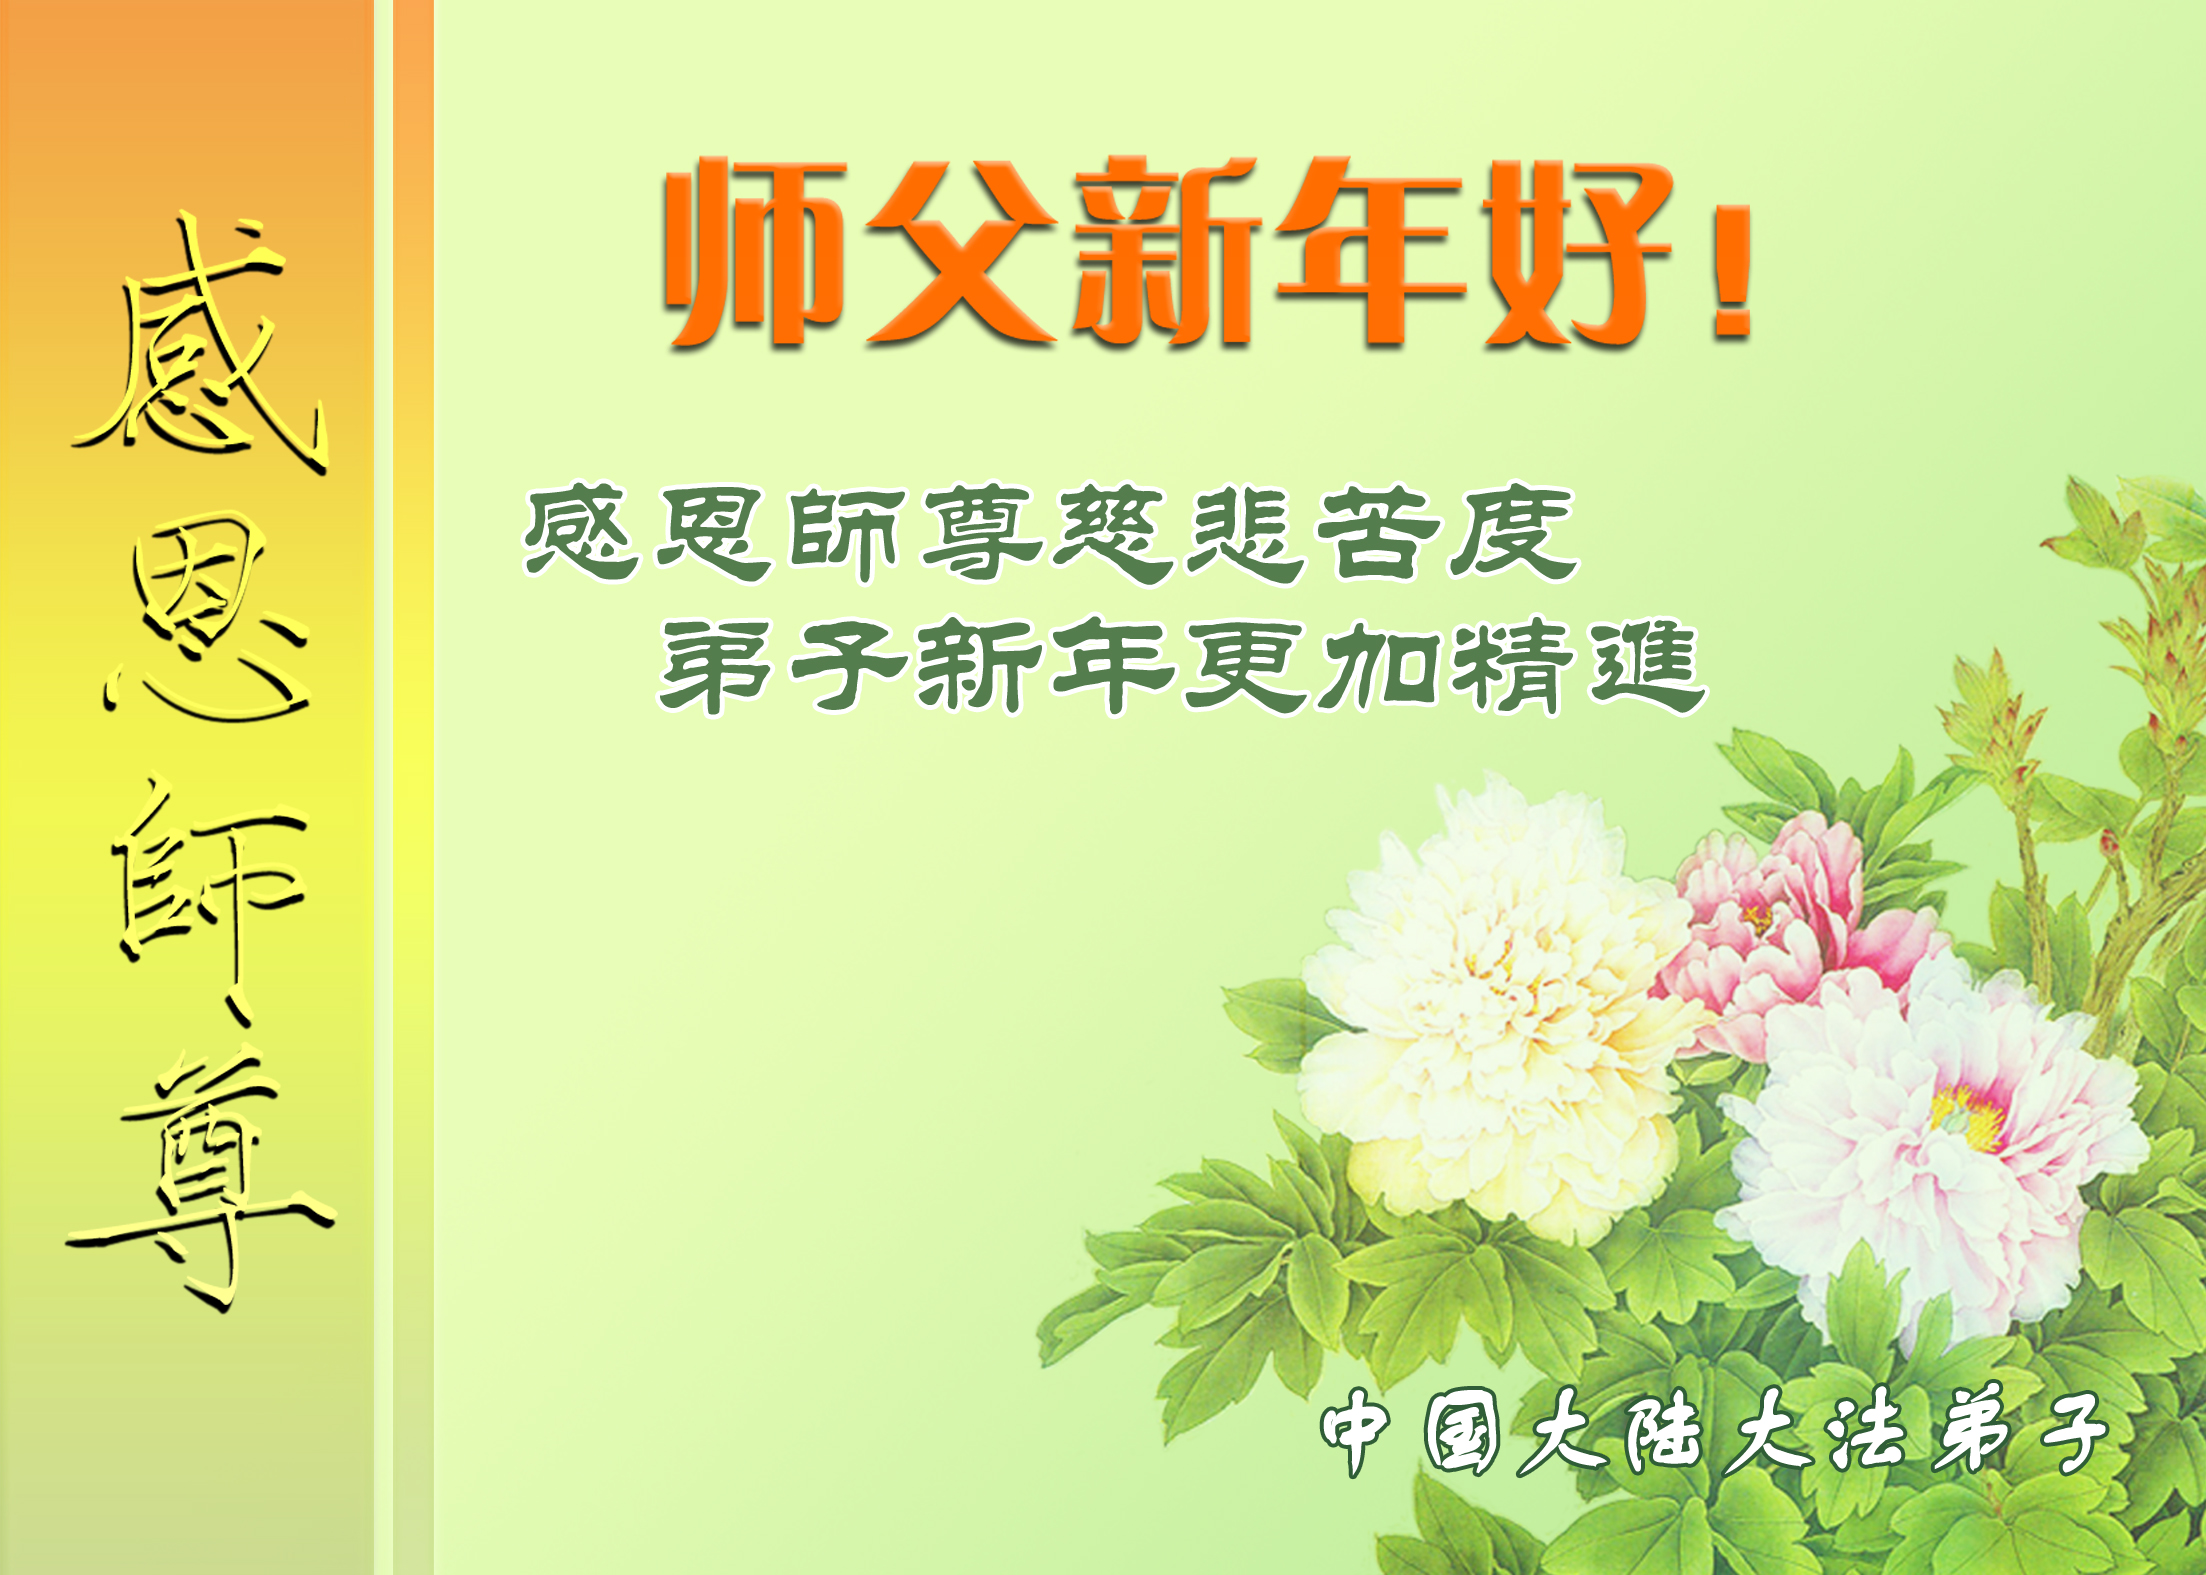 Image for article Falun Dafa Practitioners from Over 50 Professions Wish Master Li a Happy New Year!